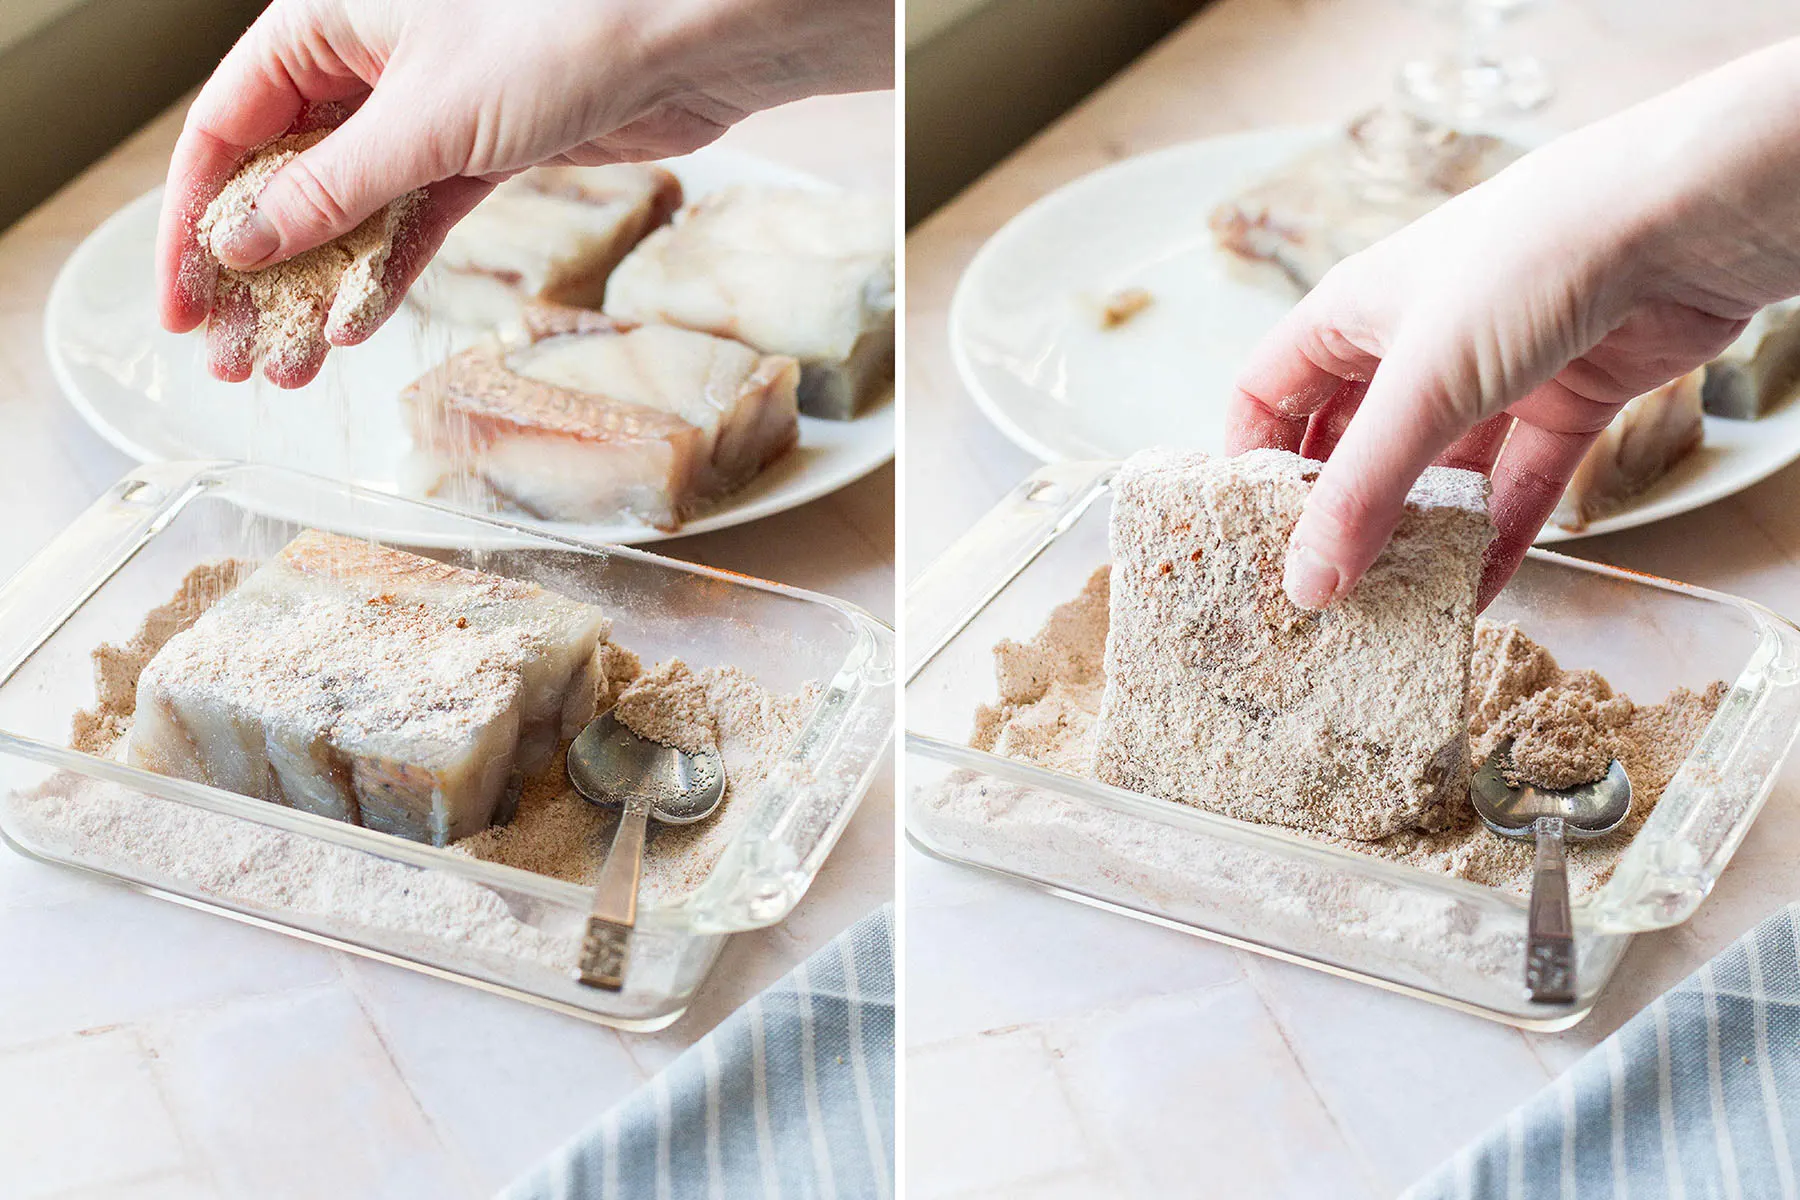 Steps on how to bread the fish.